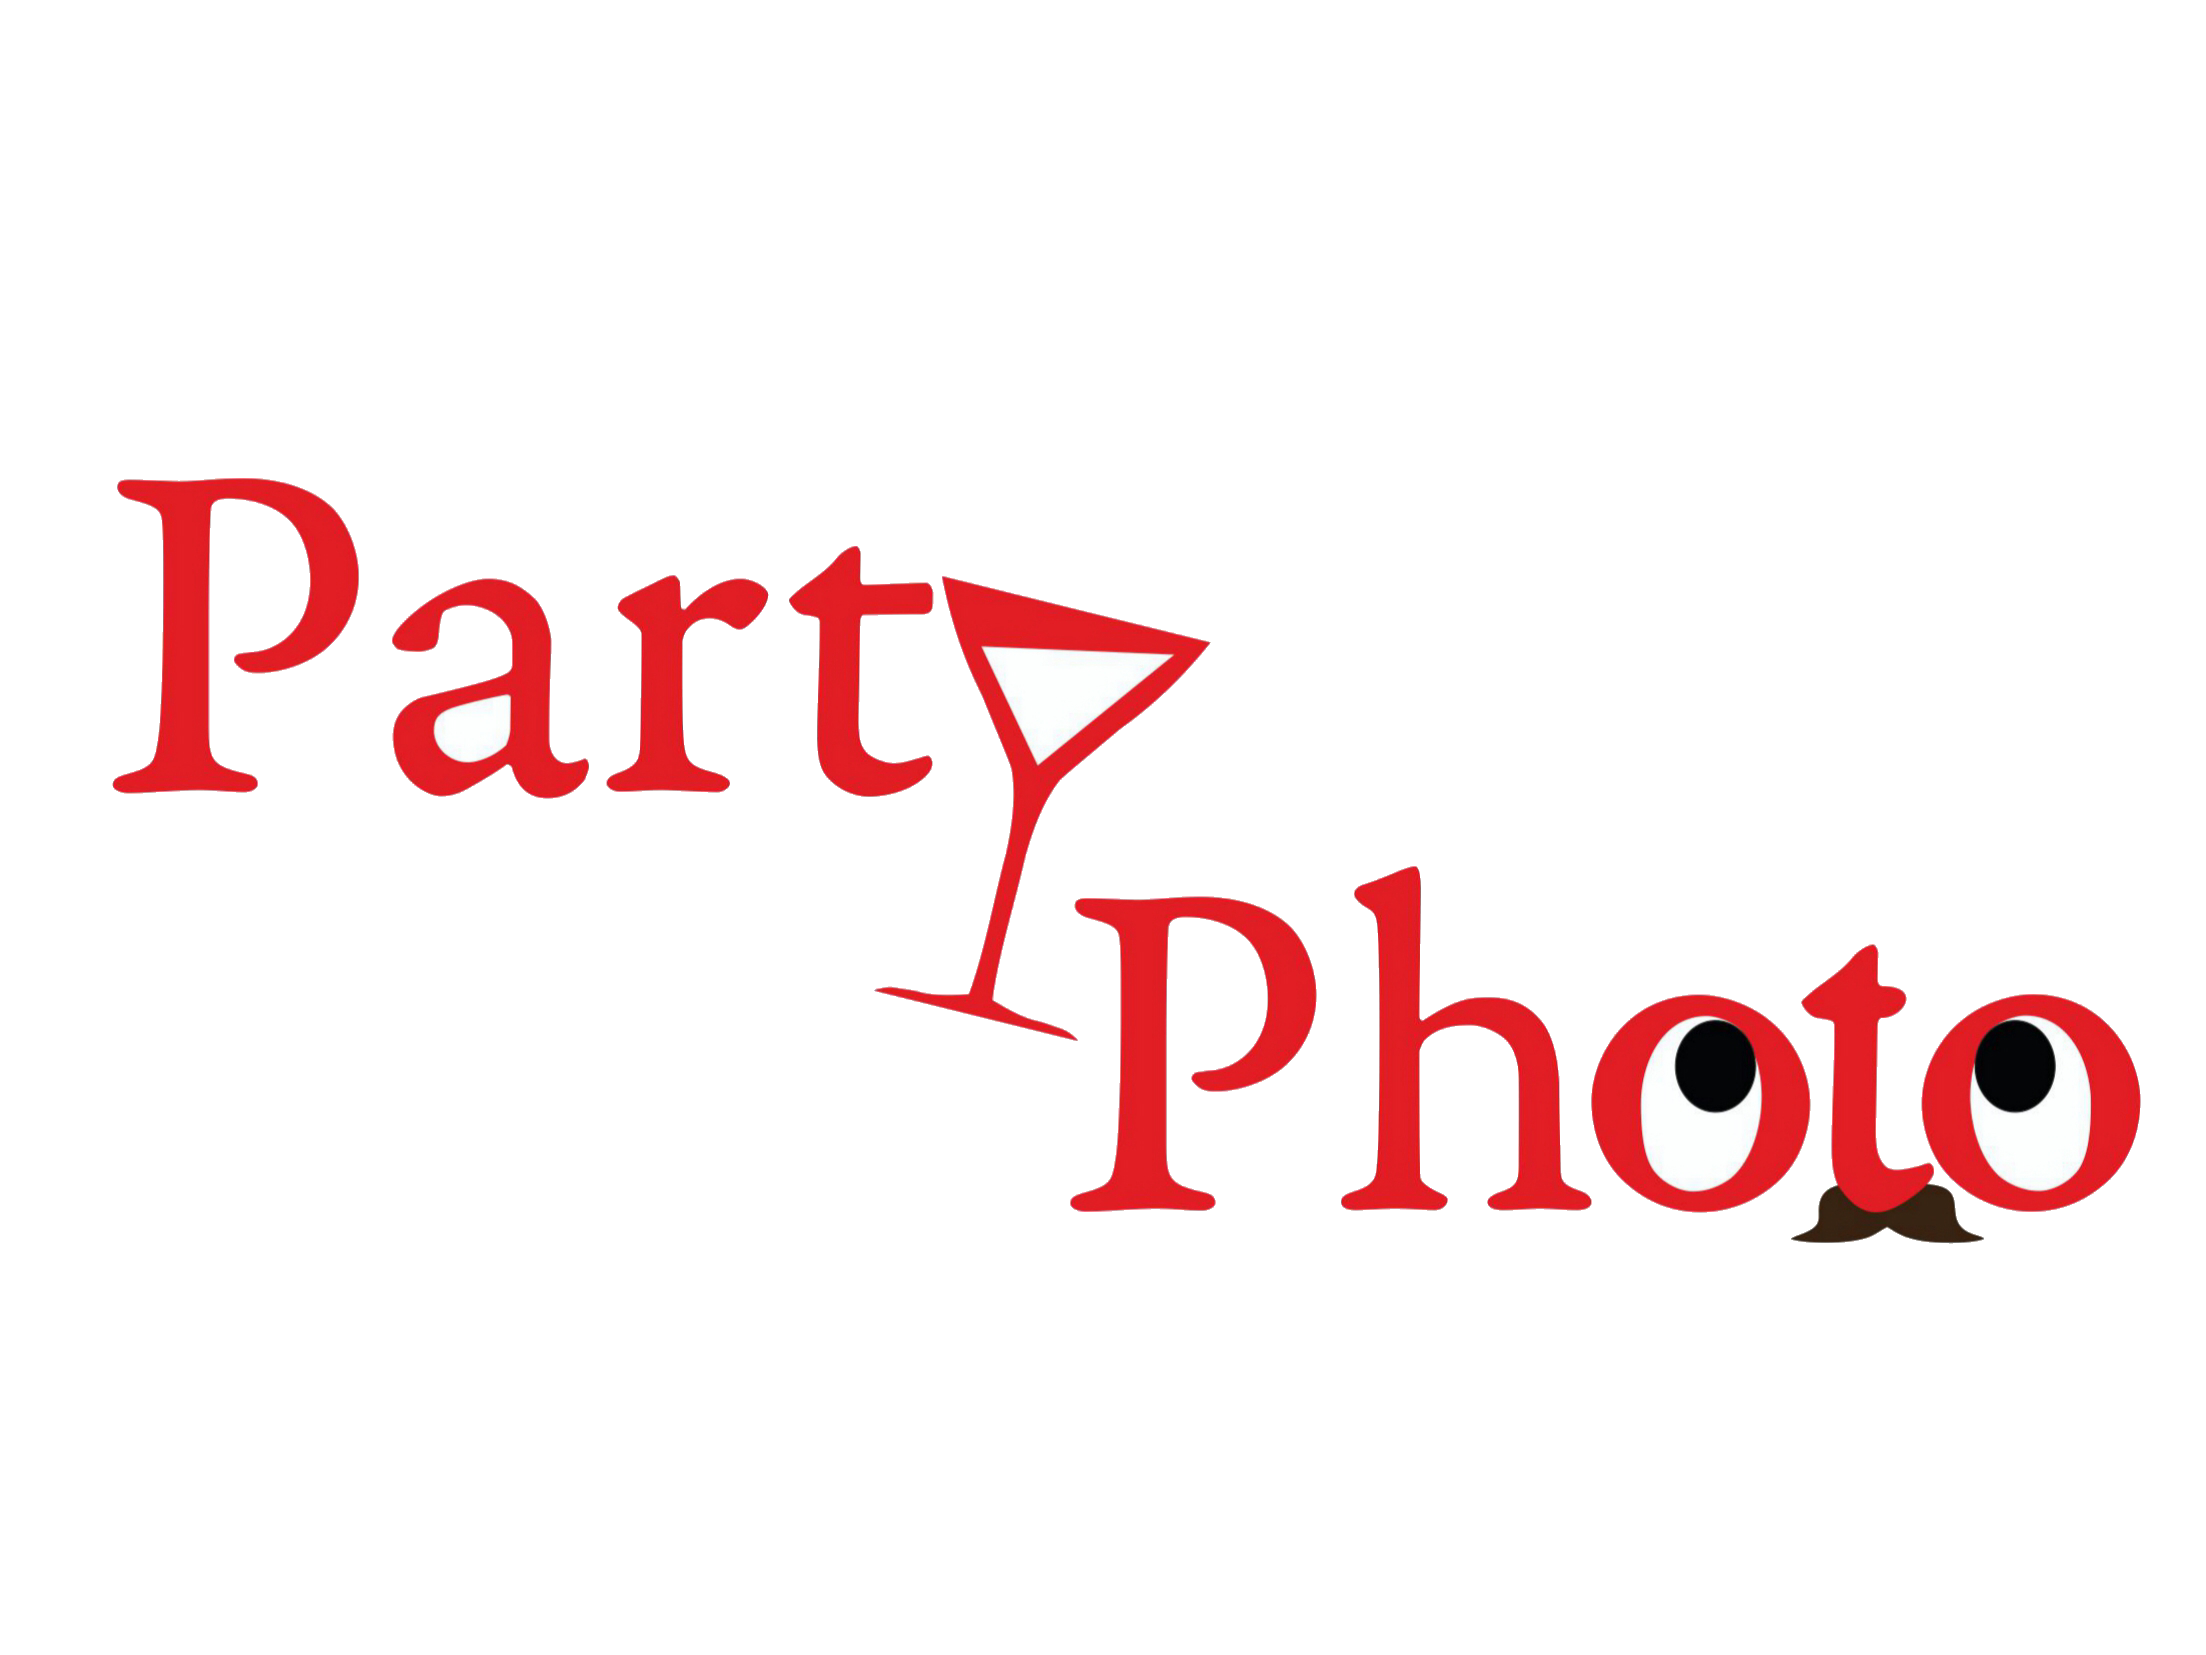 Party Photo - Photo booth